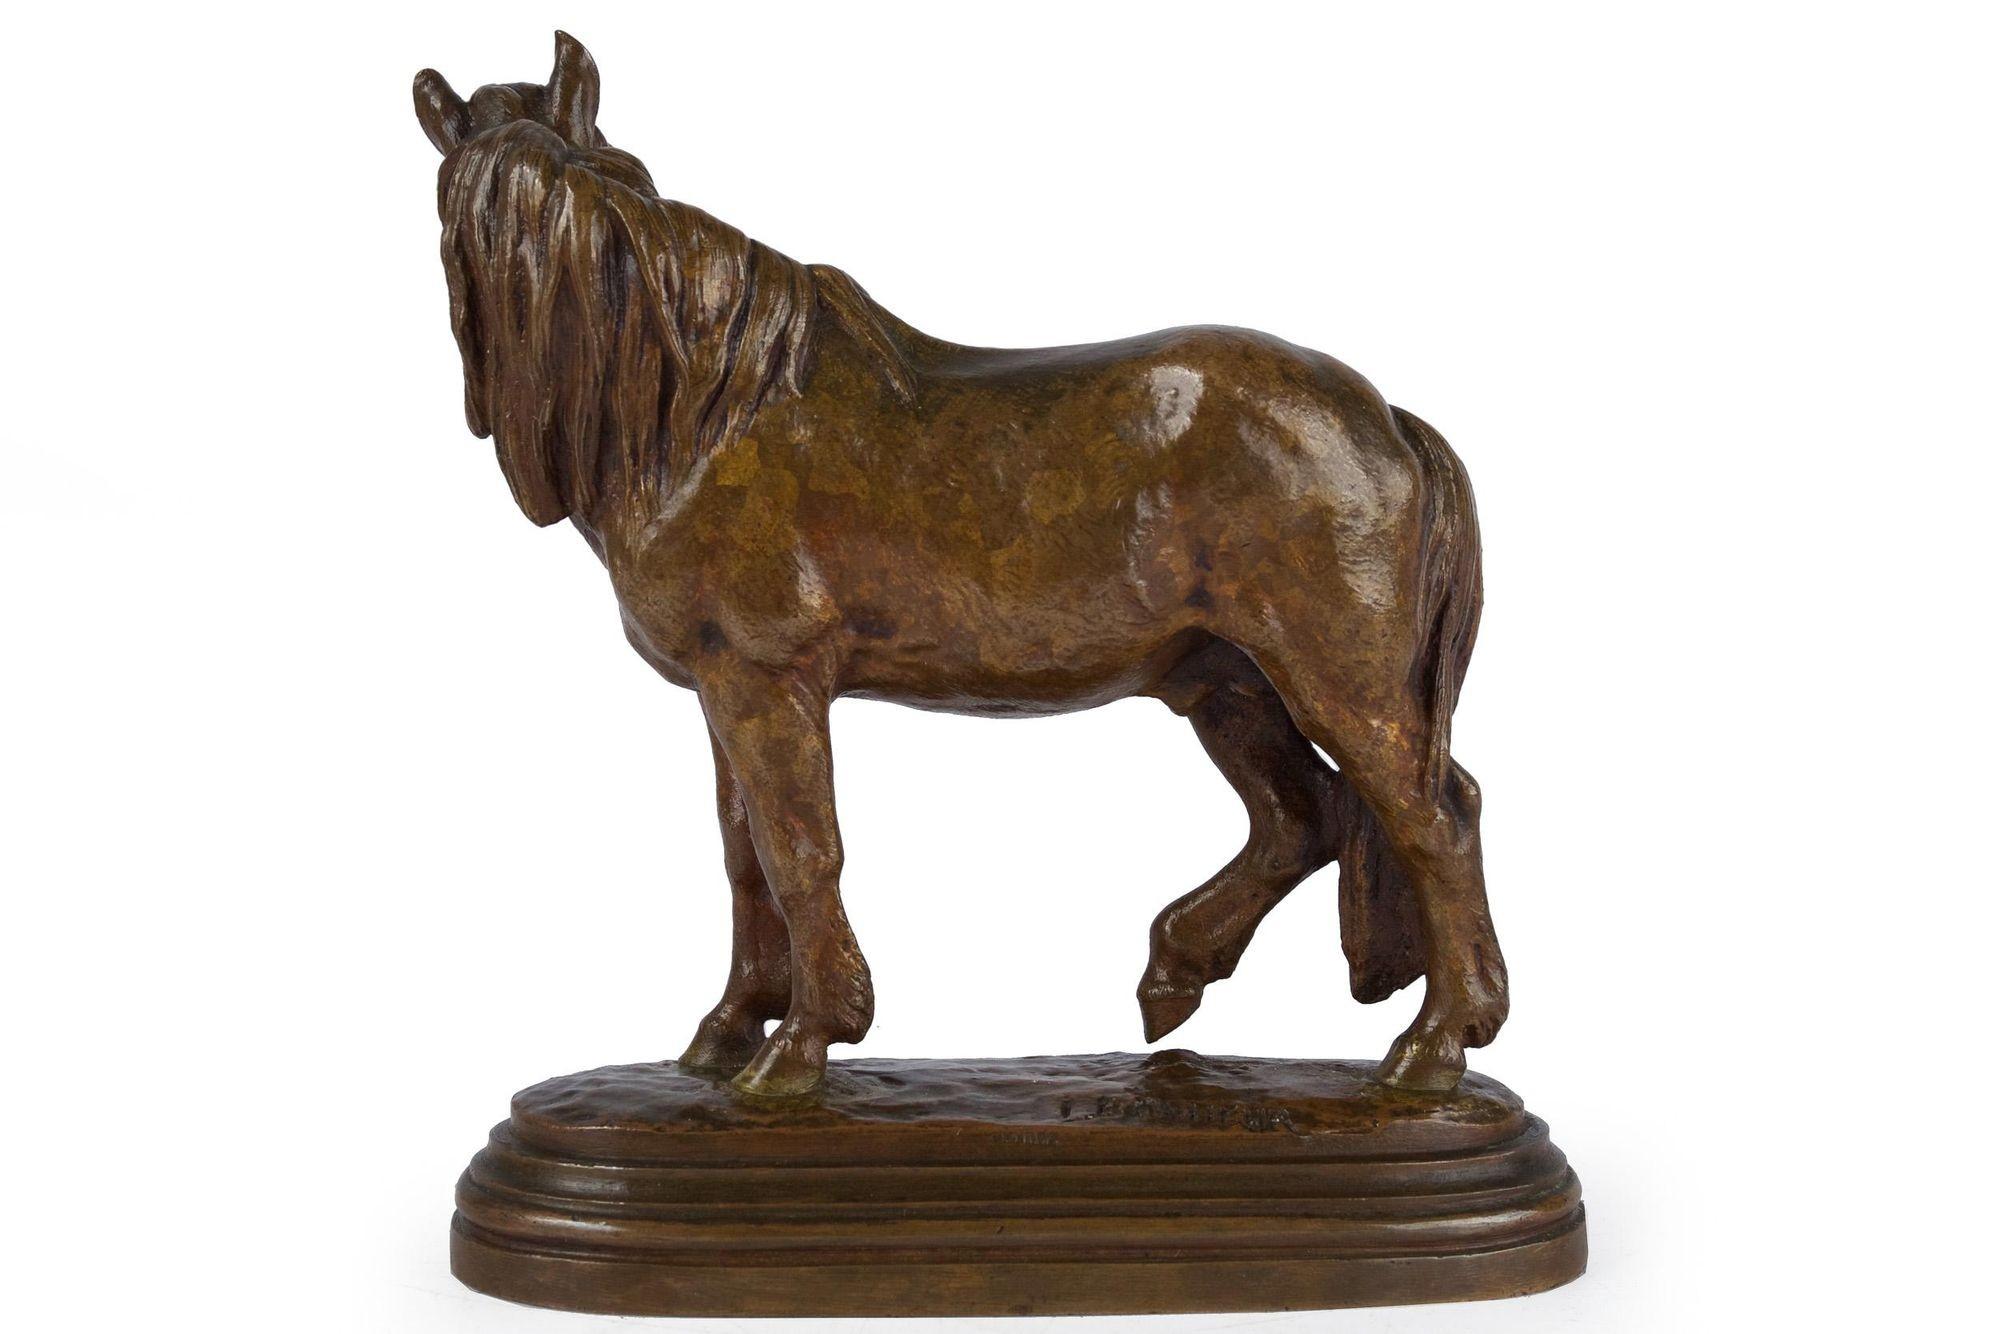 ISIDORE JULES BONHEUR (FRENCH, 1827-1901)

MODEL OF A STANDING HORSE

Patinated bronze  Signed on base 